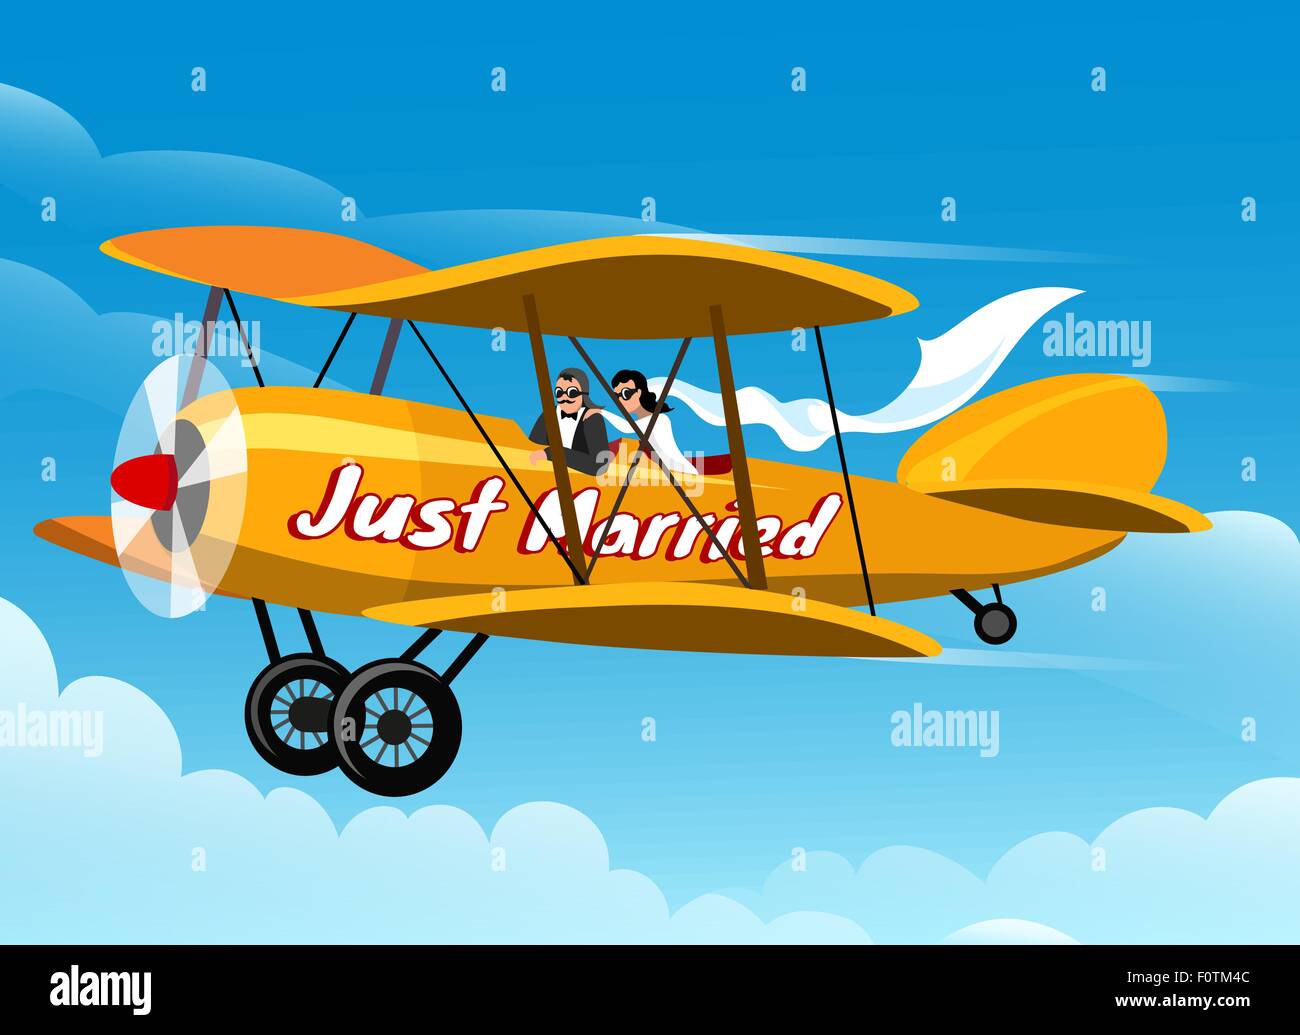 Just married couple flies honeymoon trip on airplane. Only free font used. Stock Vector